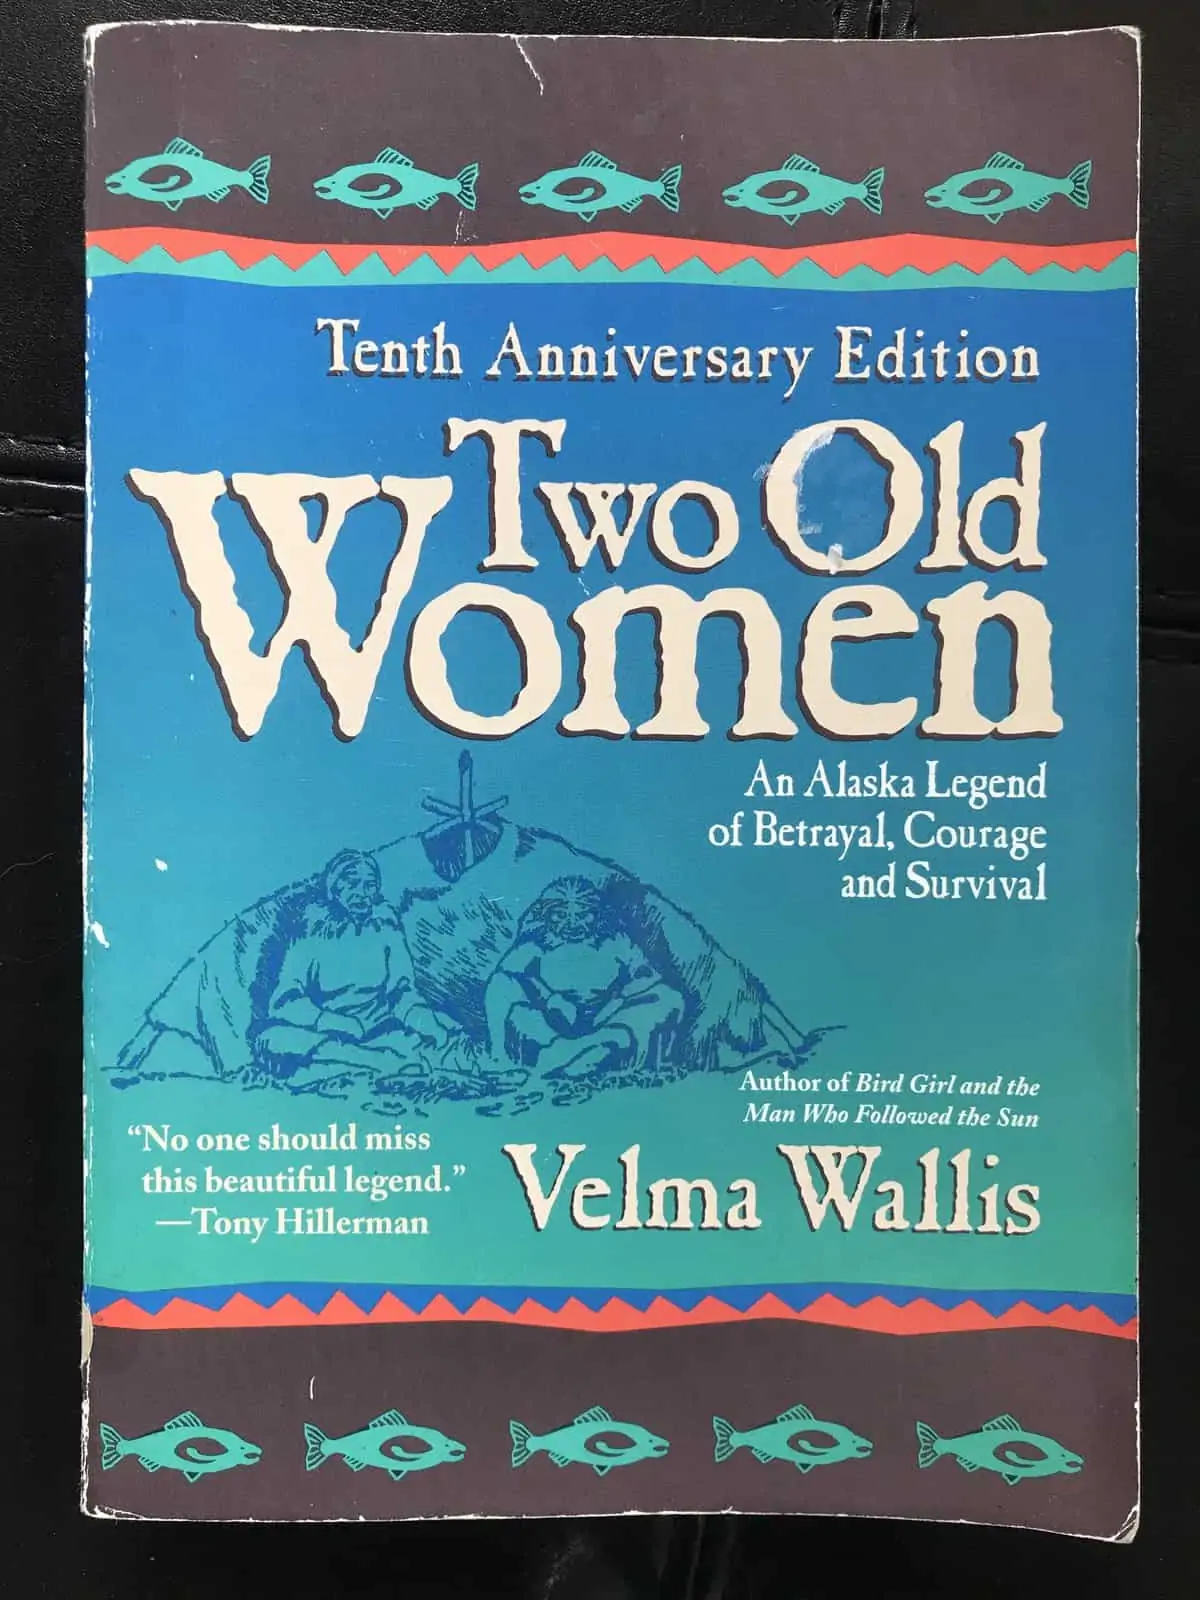 Two Old Women: An Alaska Legend of Betrayal, Courage & Survival by Velma Wallis – Book Review